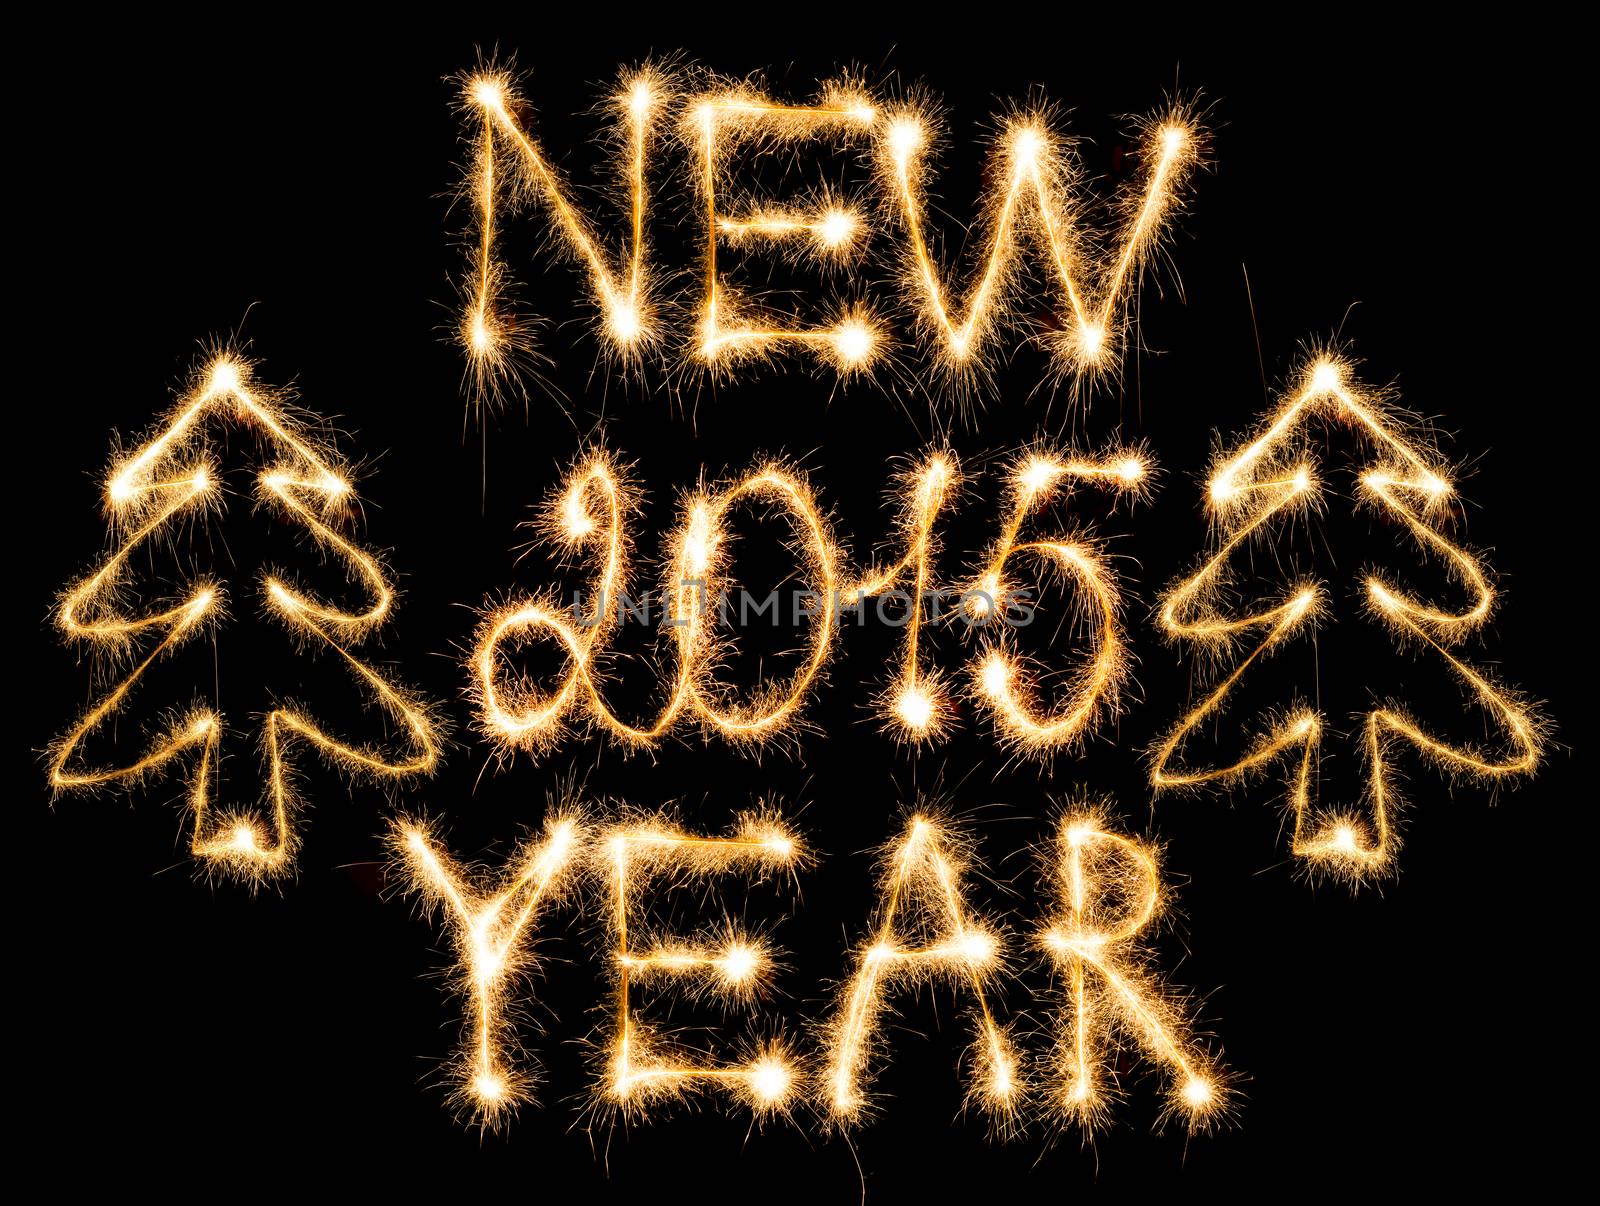 Happy New Year 2015 made of sparkles on black background